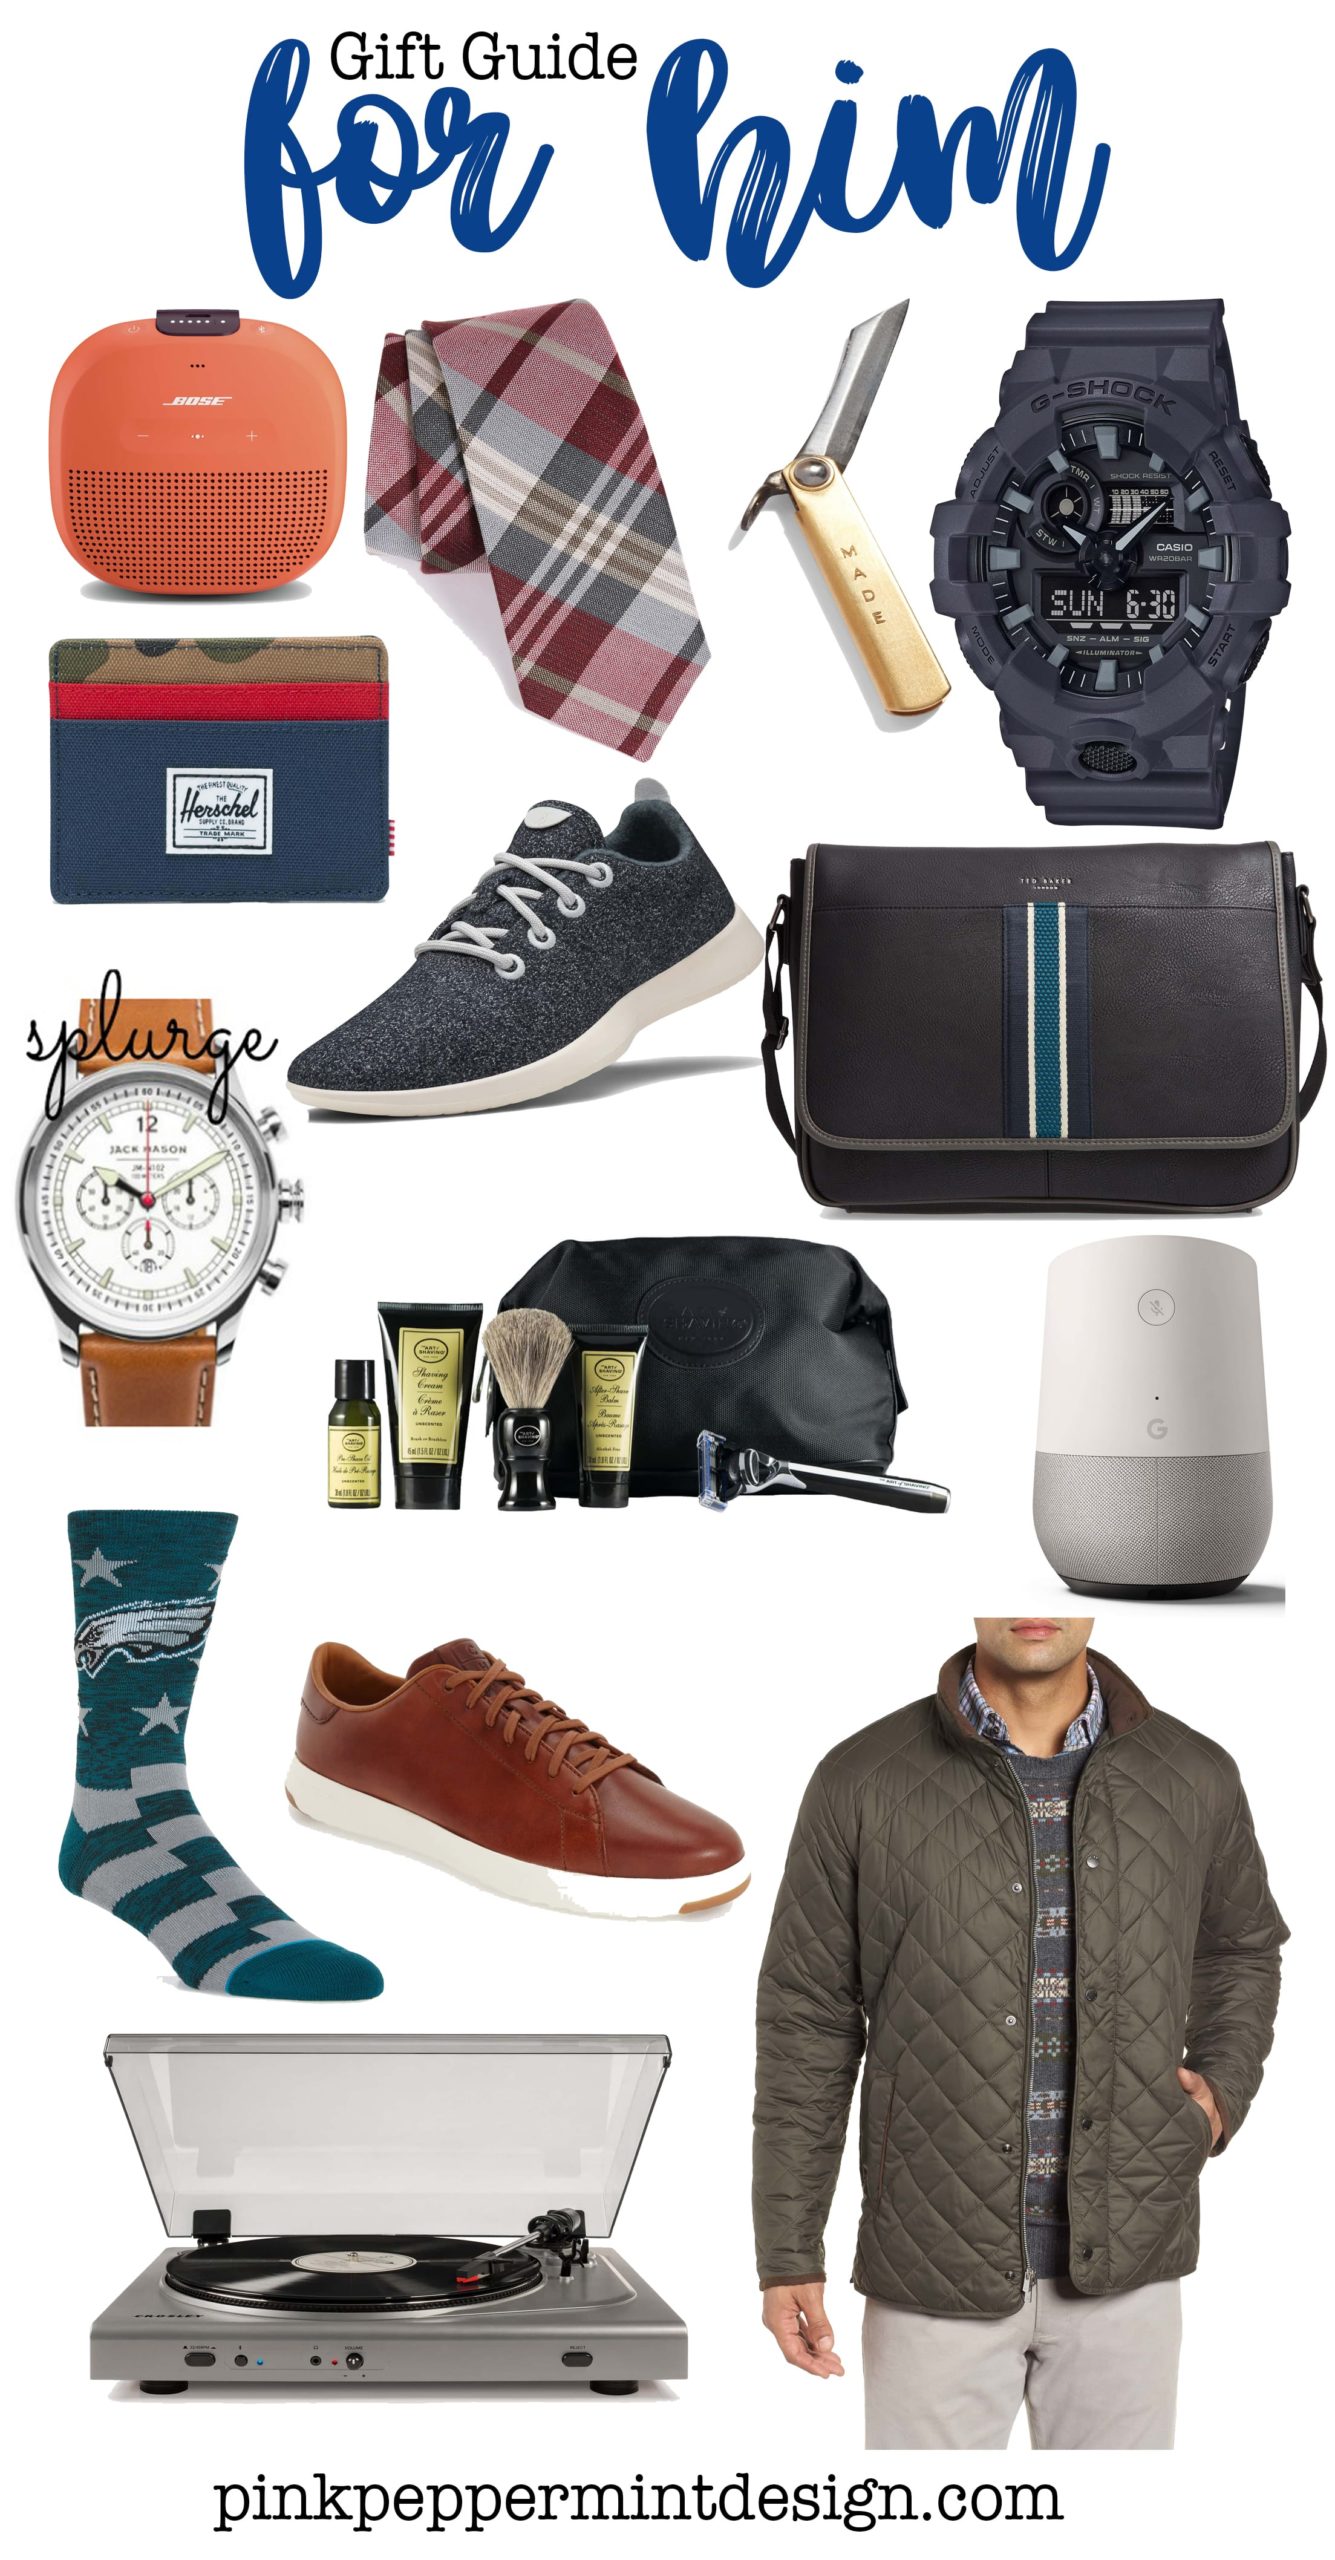 14 Great Christmas Gift Ideas for Dad  Christmas The Little List